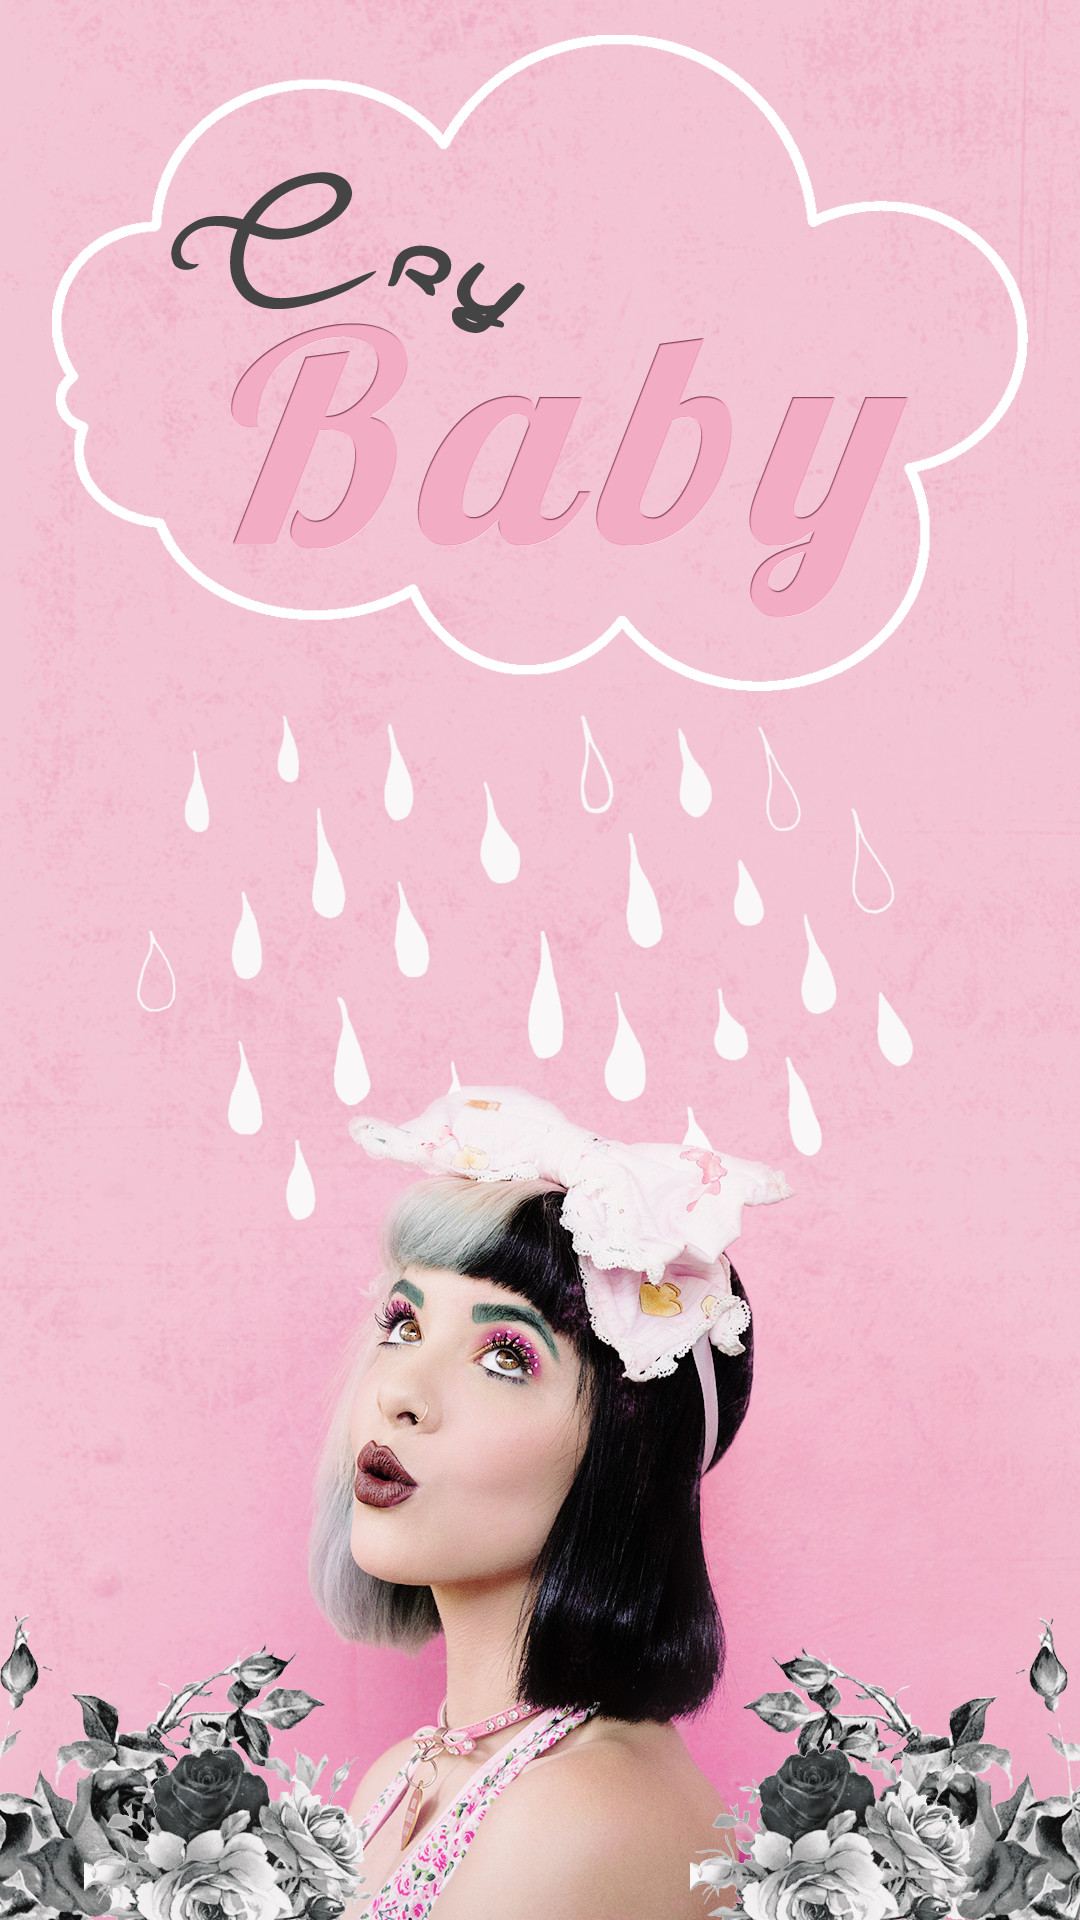 1080x1920 made some cutesy melanie martinez iphone wallpapers cause i'm in luv